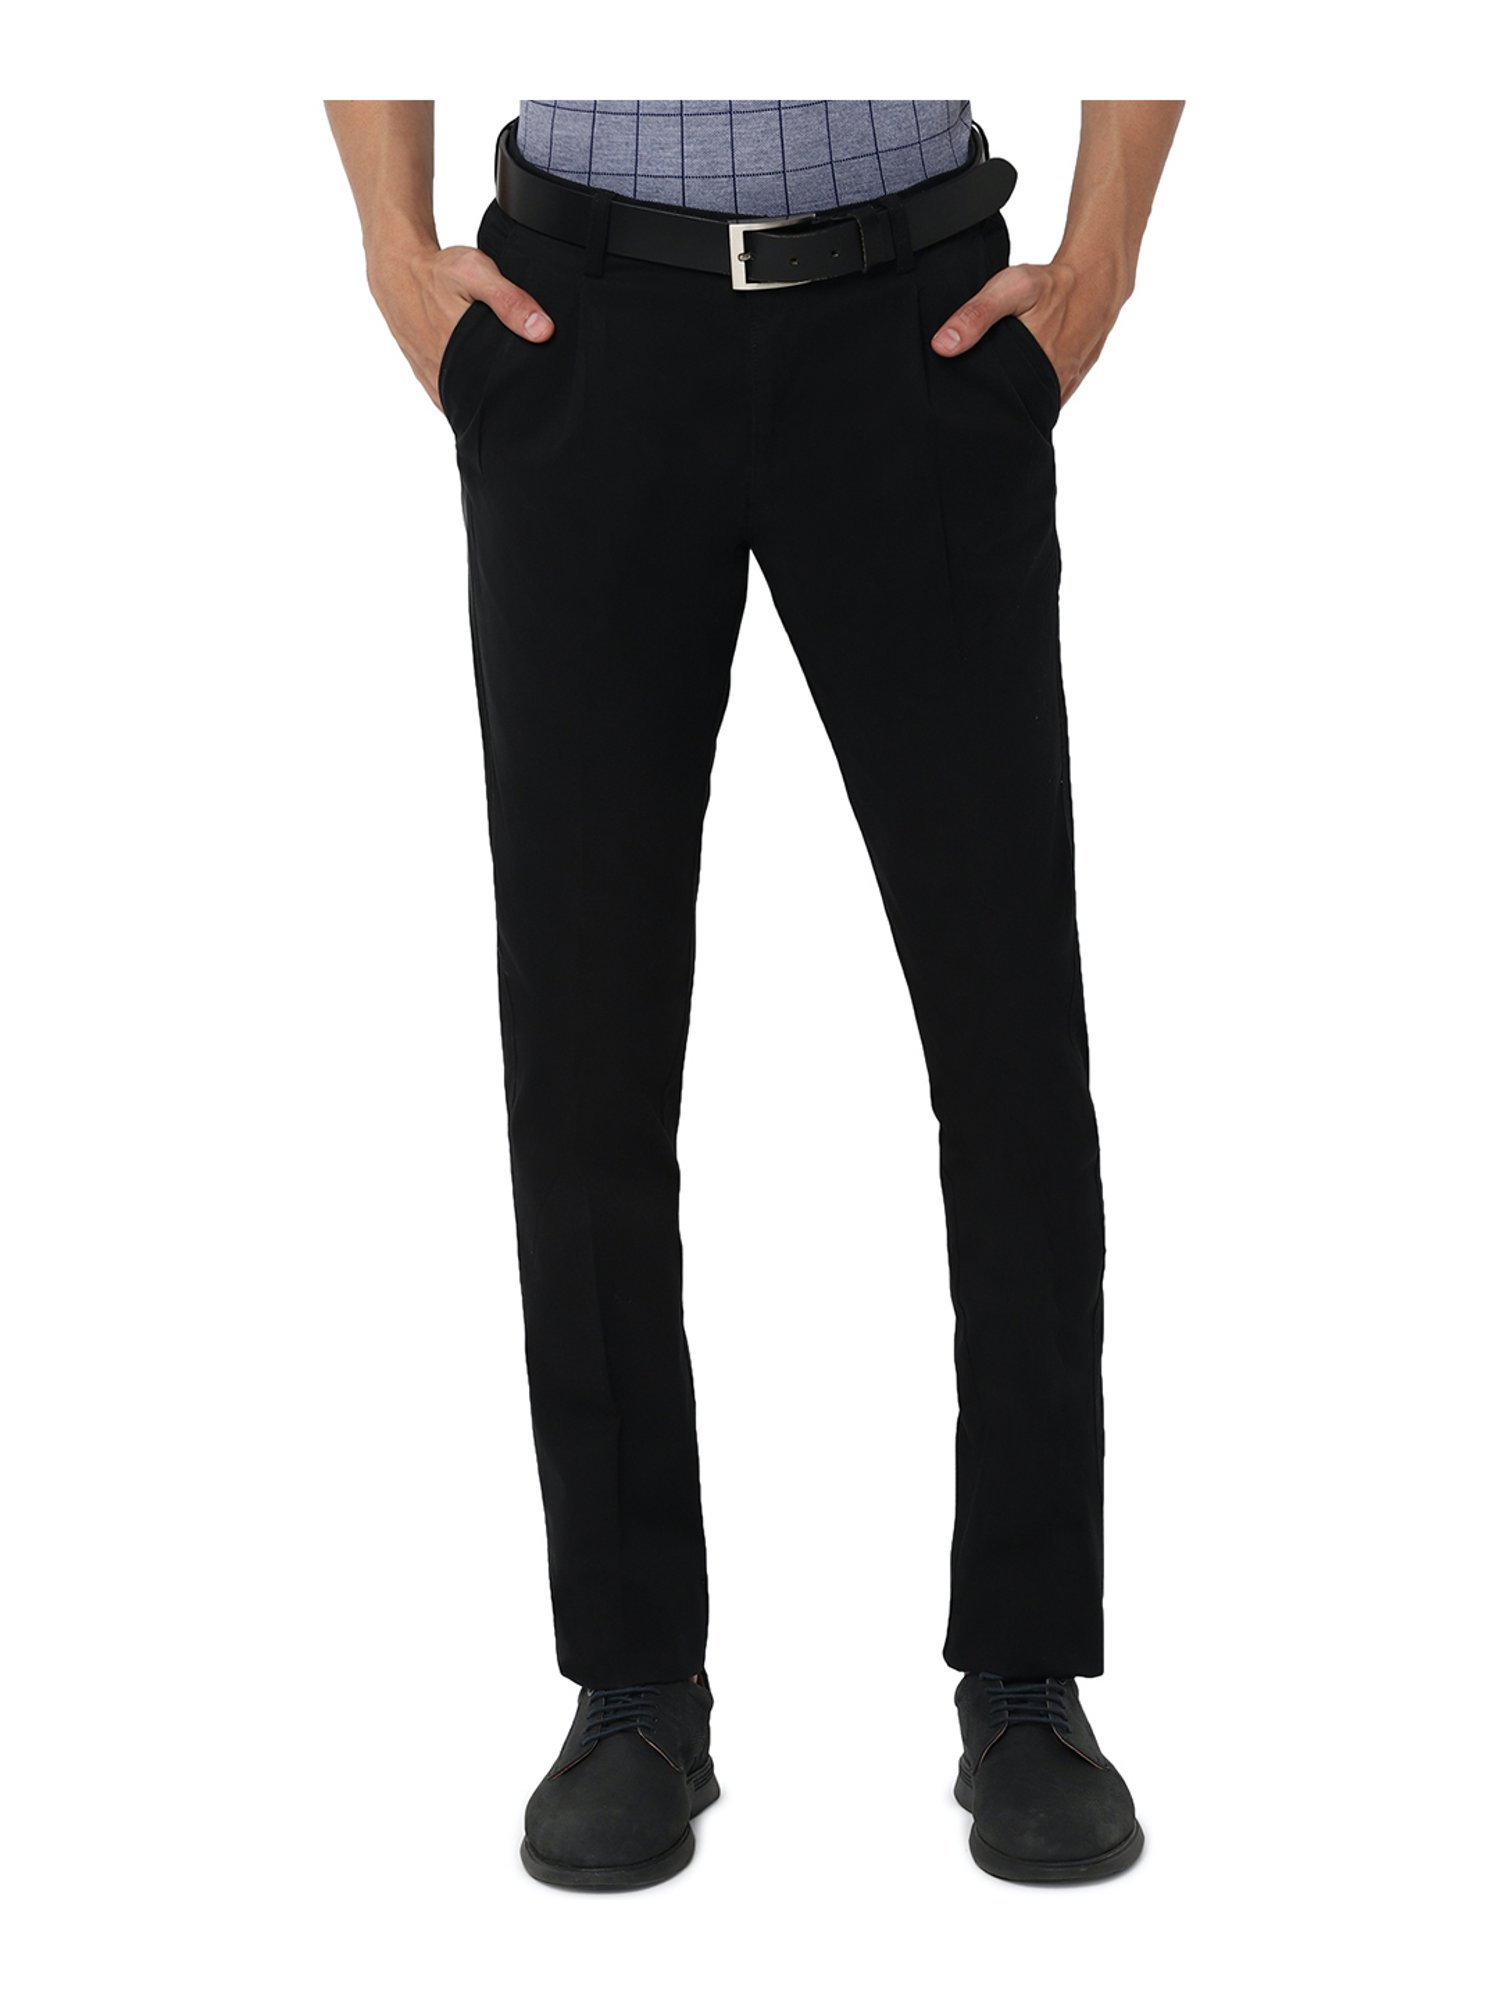 Buy Clavelite Solid Mens Formal Pleated Front Trouser Regular fit Cotton  Blend Gents Pants for Office interviews from Size 28 to 44 28 Black at  Amazonin